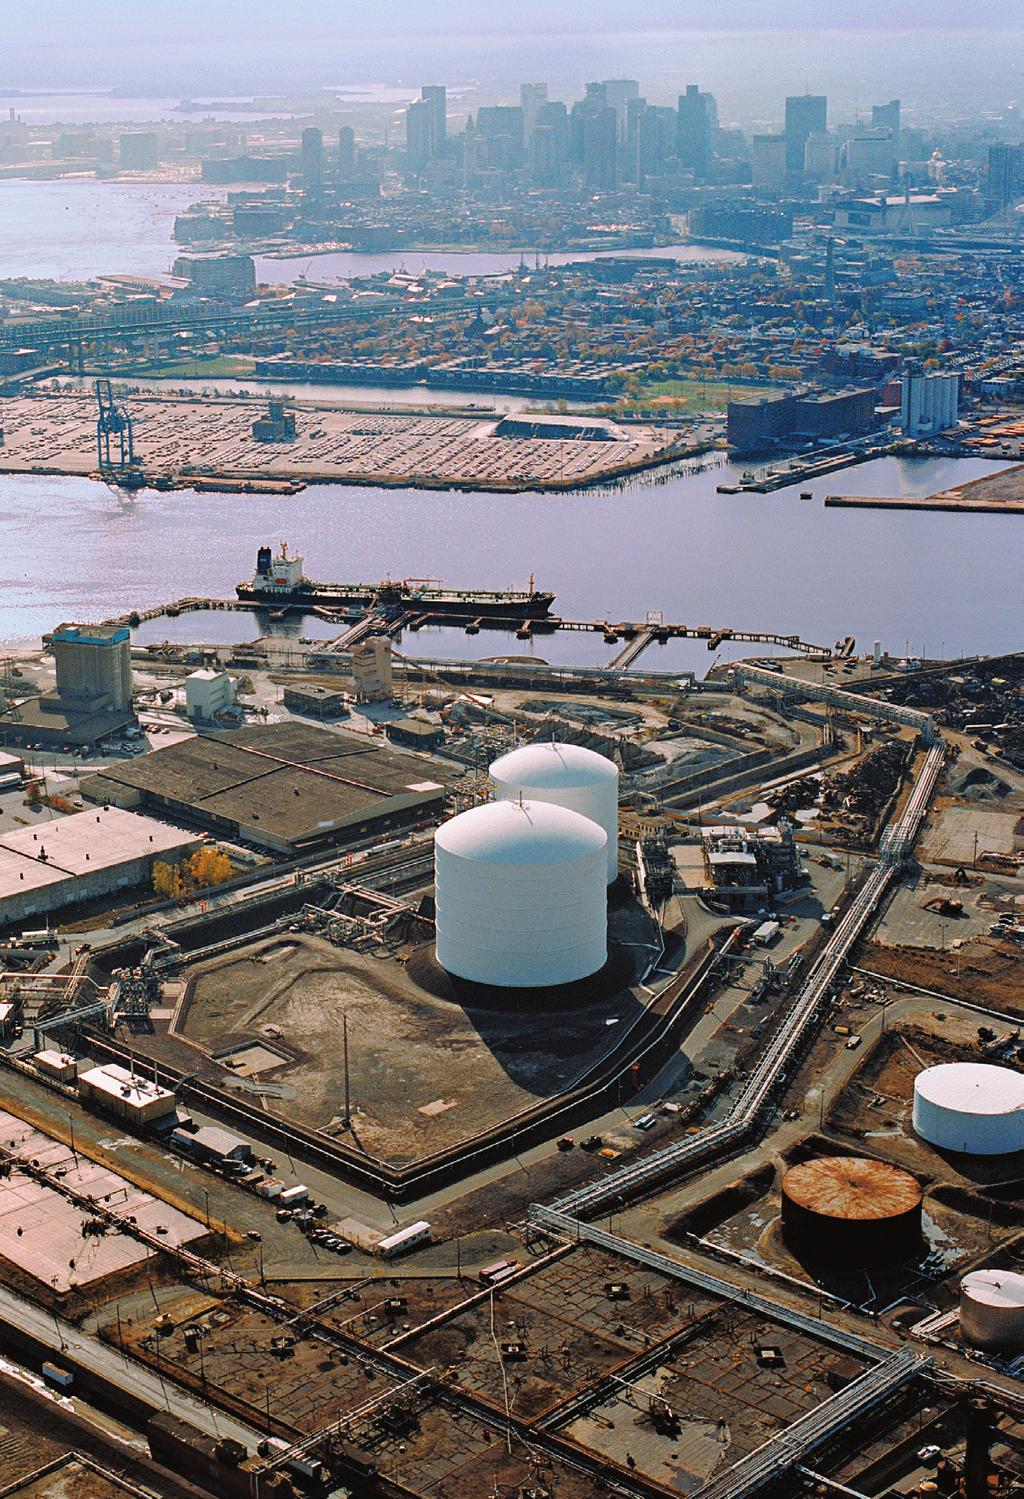 The Everett facility is well positioned and strategically located to meet New England s demand Peak natural gas consumption can and should be met with peak natural gas supplies.